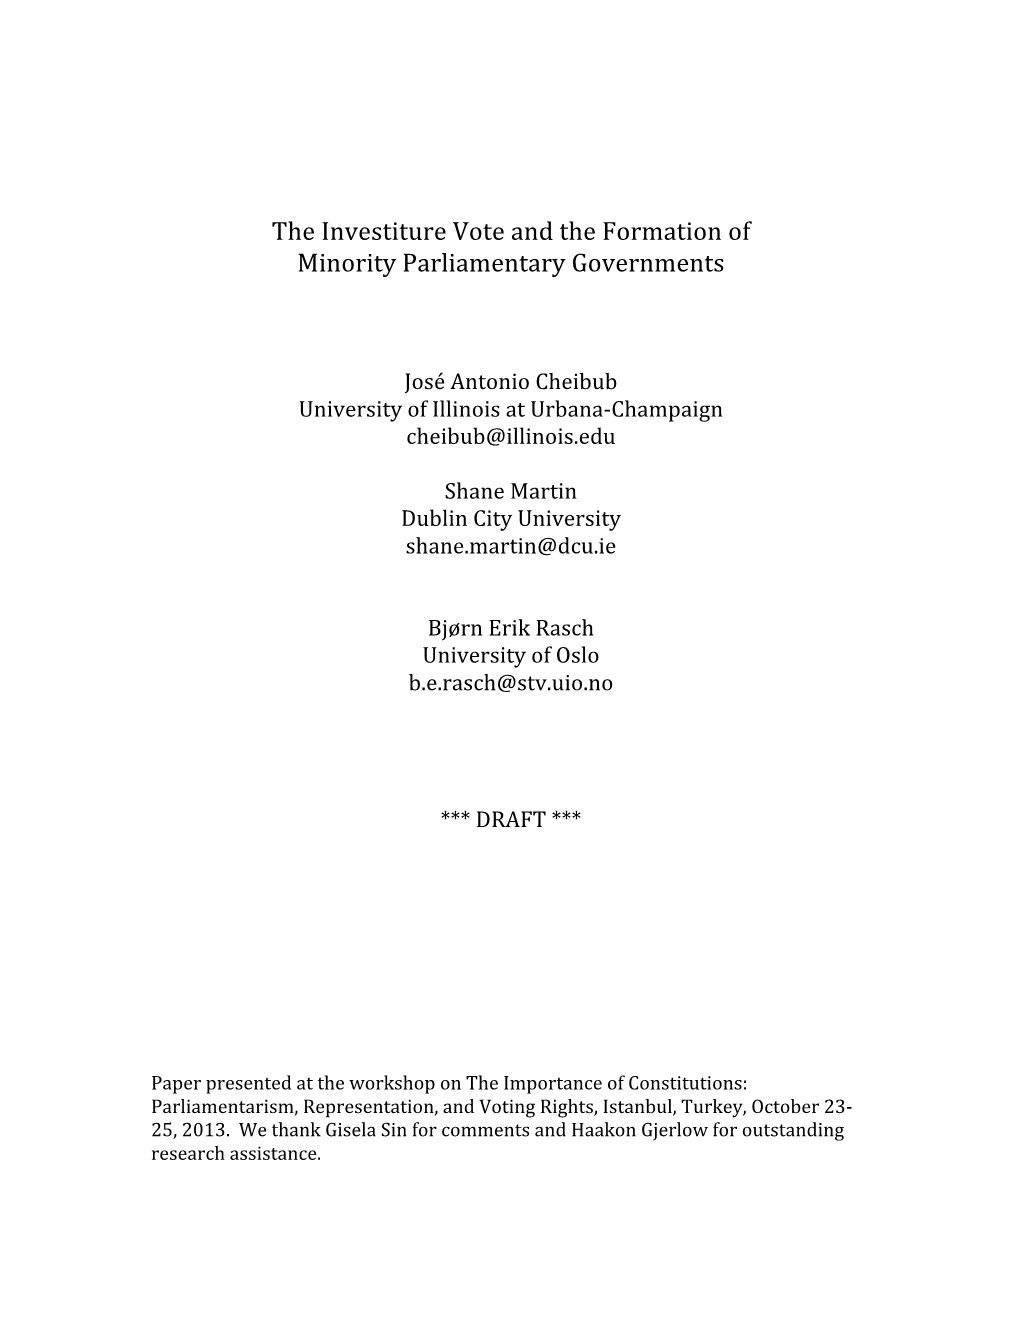 The Investiture Vote and the Formation of Minority Parliamentary Governments